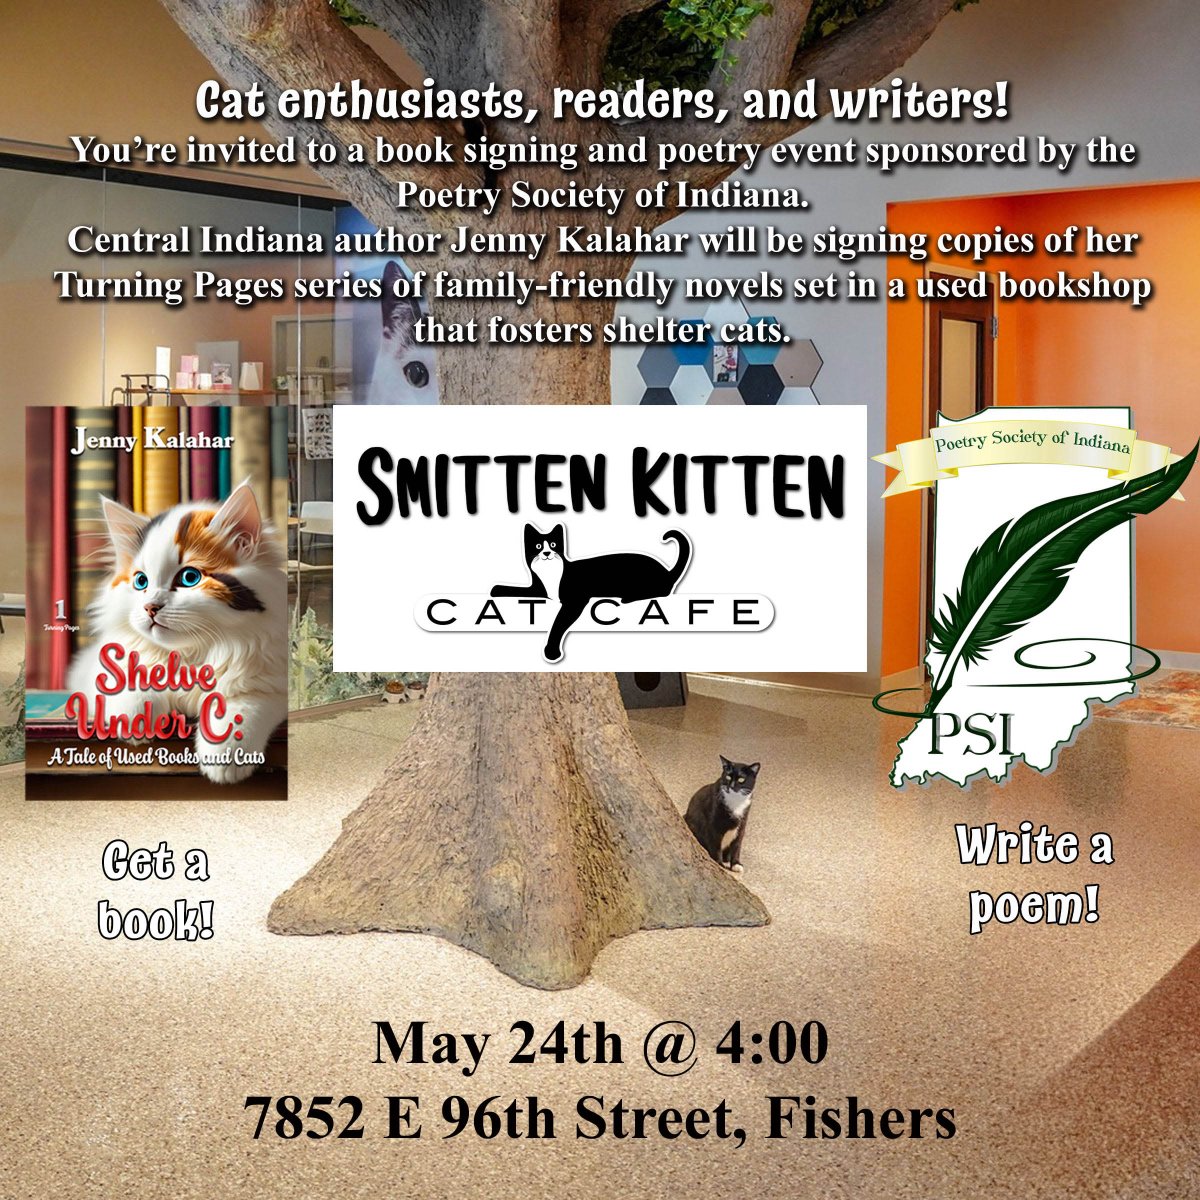 Here's my collaboration with the Poetry Society of Indiana. I haven't done a book signing since one at Barnes & Noble right before the pandemic shutdown. Hope I remember how to sign my name! #catbooks #booksigning #poetry